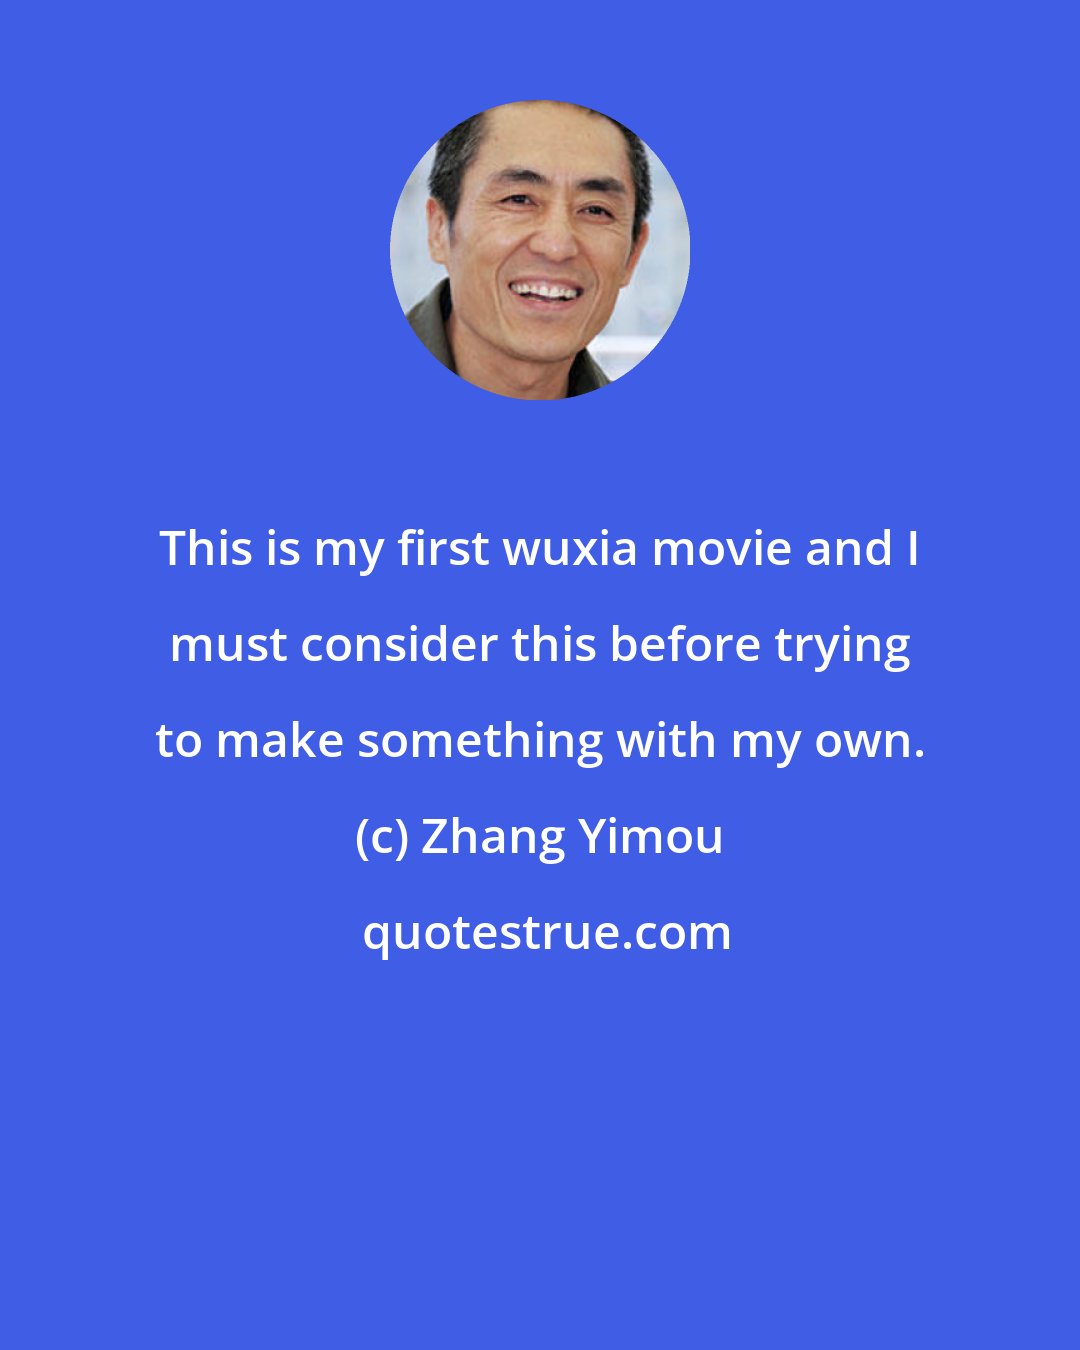 Zhang Yimou: This is my first wuxia movie and I must consider this before trying to make something with my own.